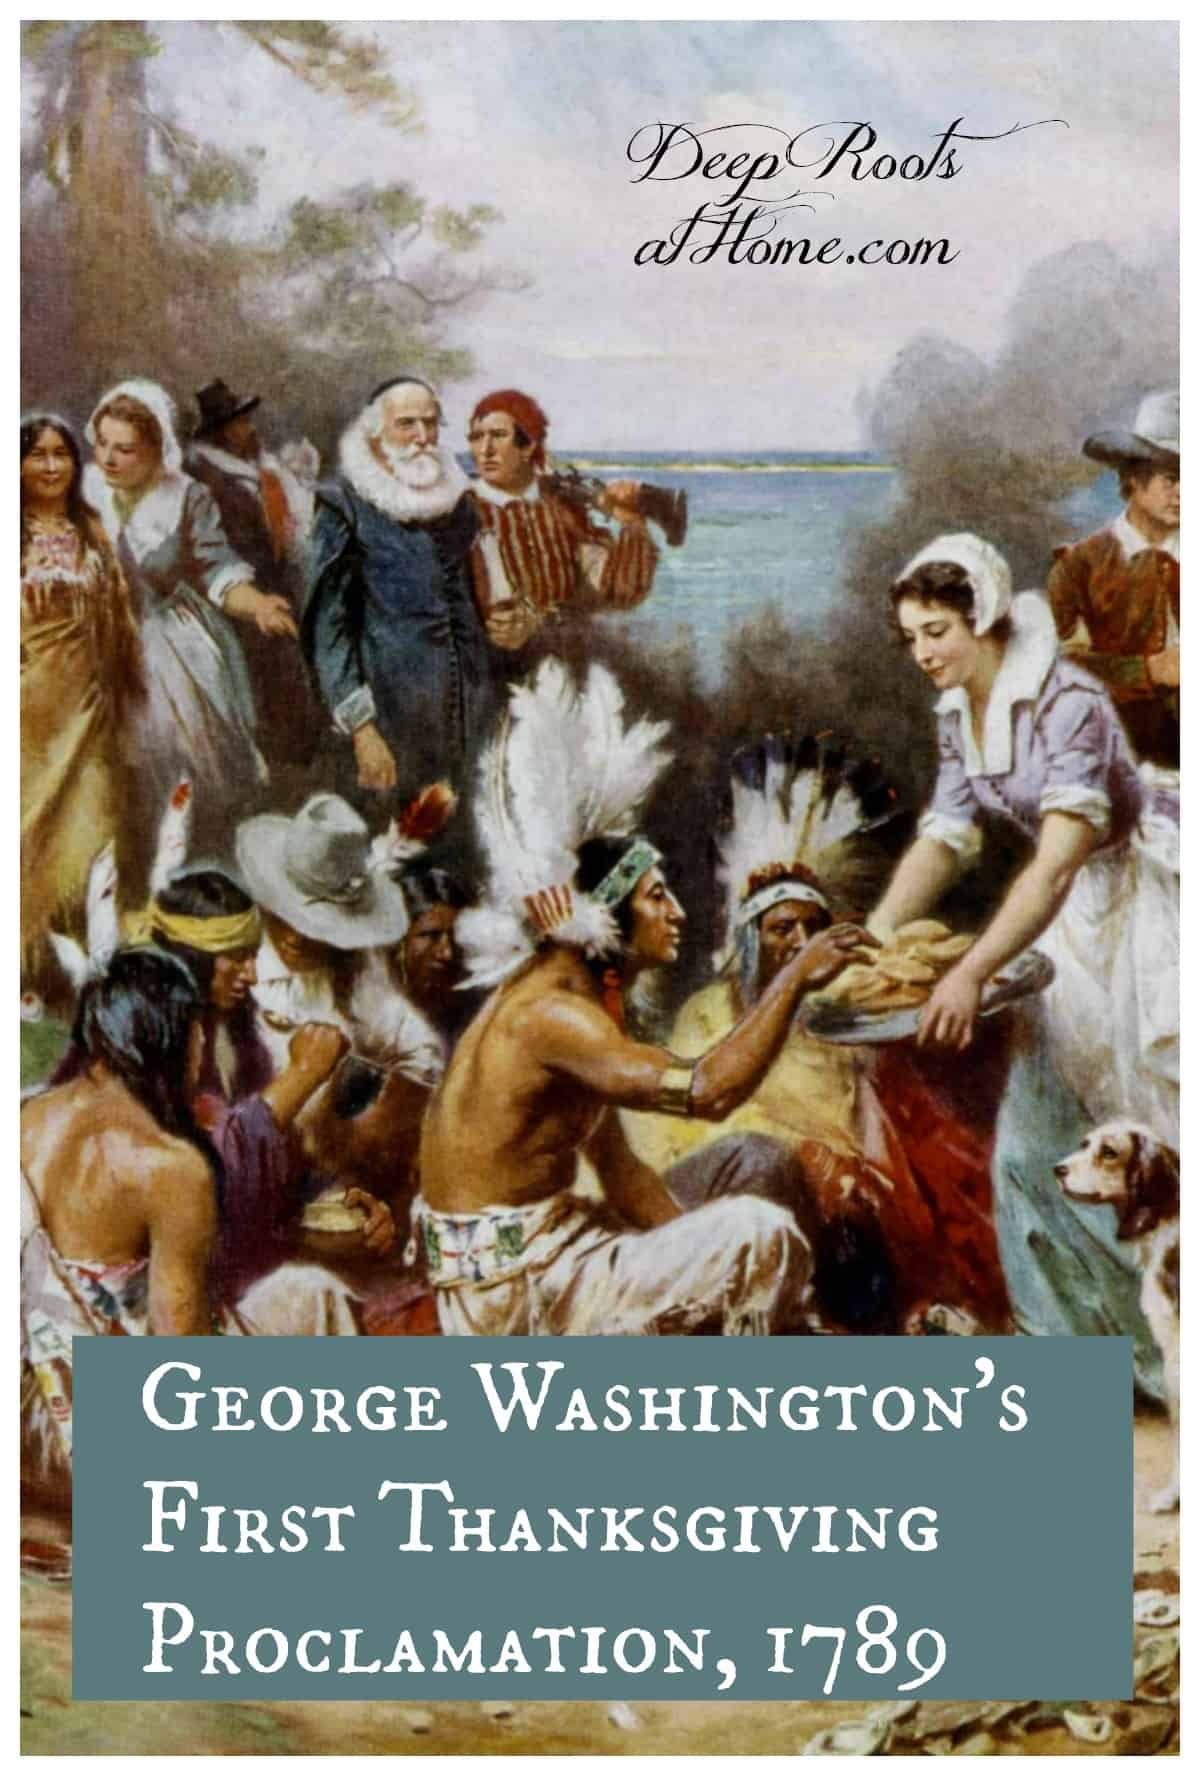 George Washington's First Thanksgiving Proclamation, 1789. American Indians and Pilgrims eating together. Pin image.